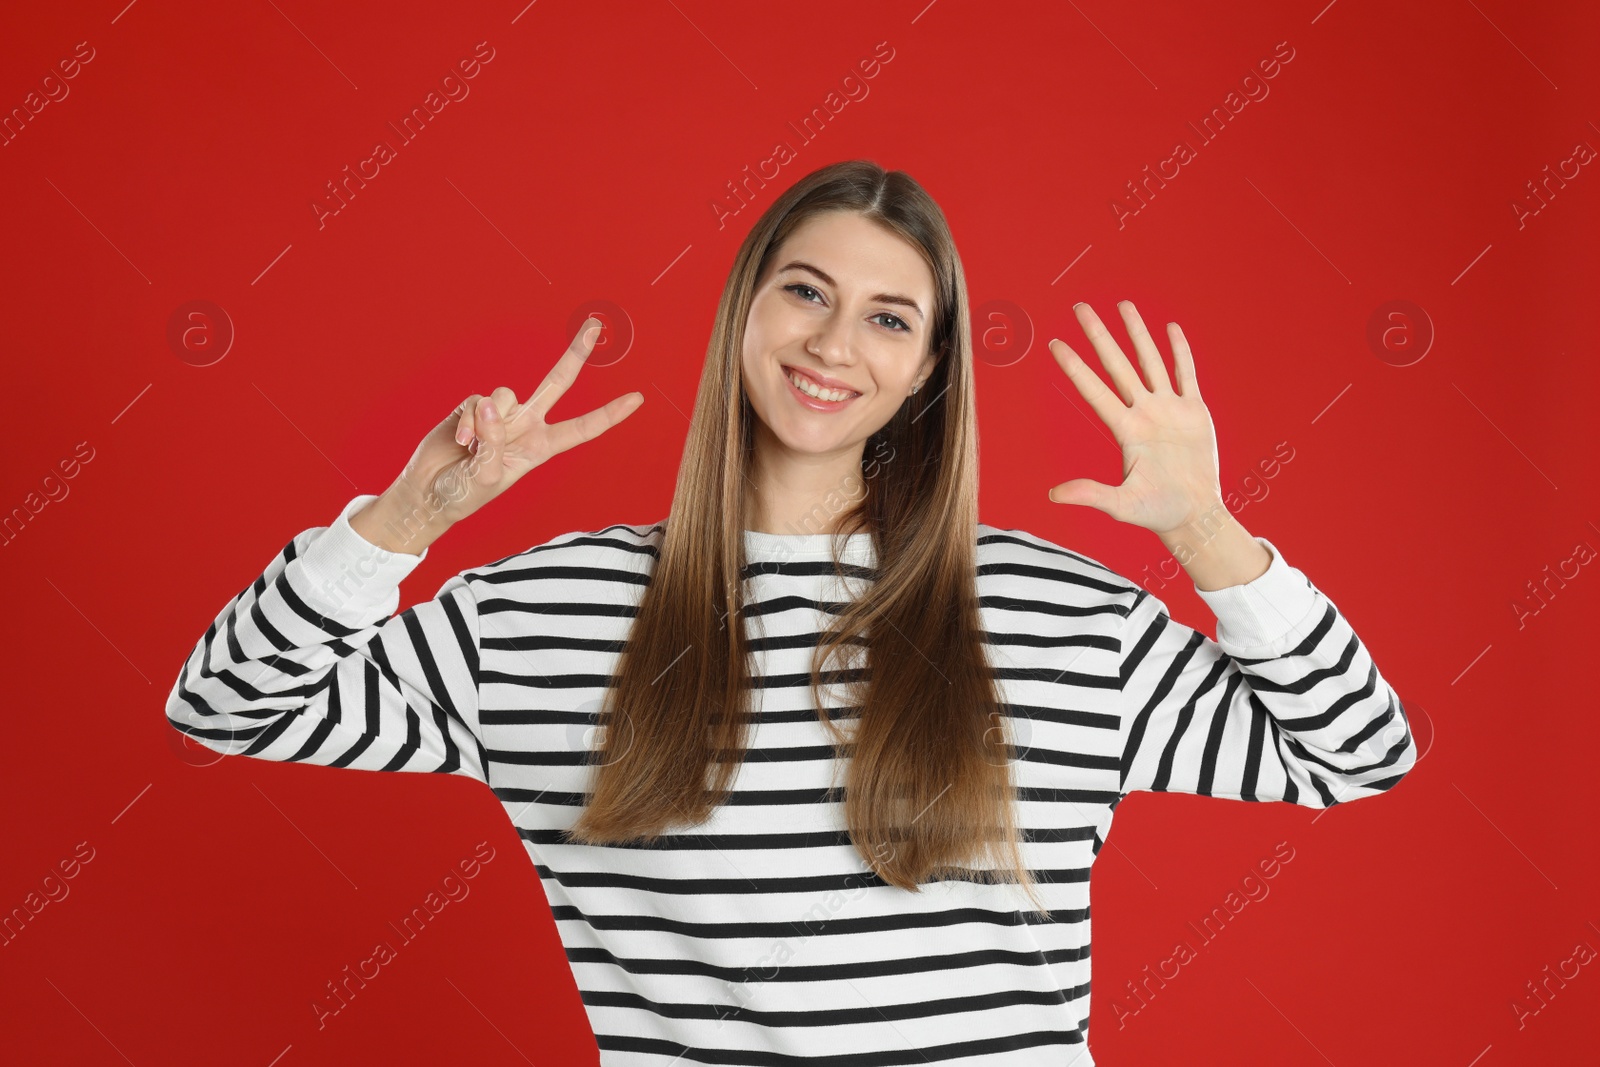 Photo of Woman showing number seven with her hands on red background